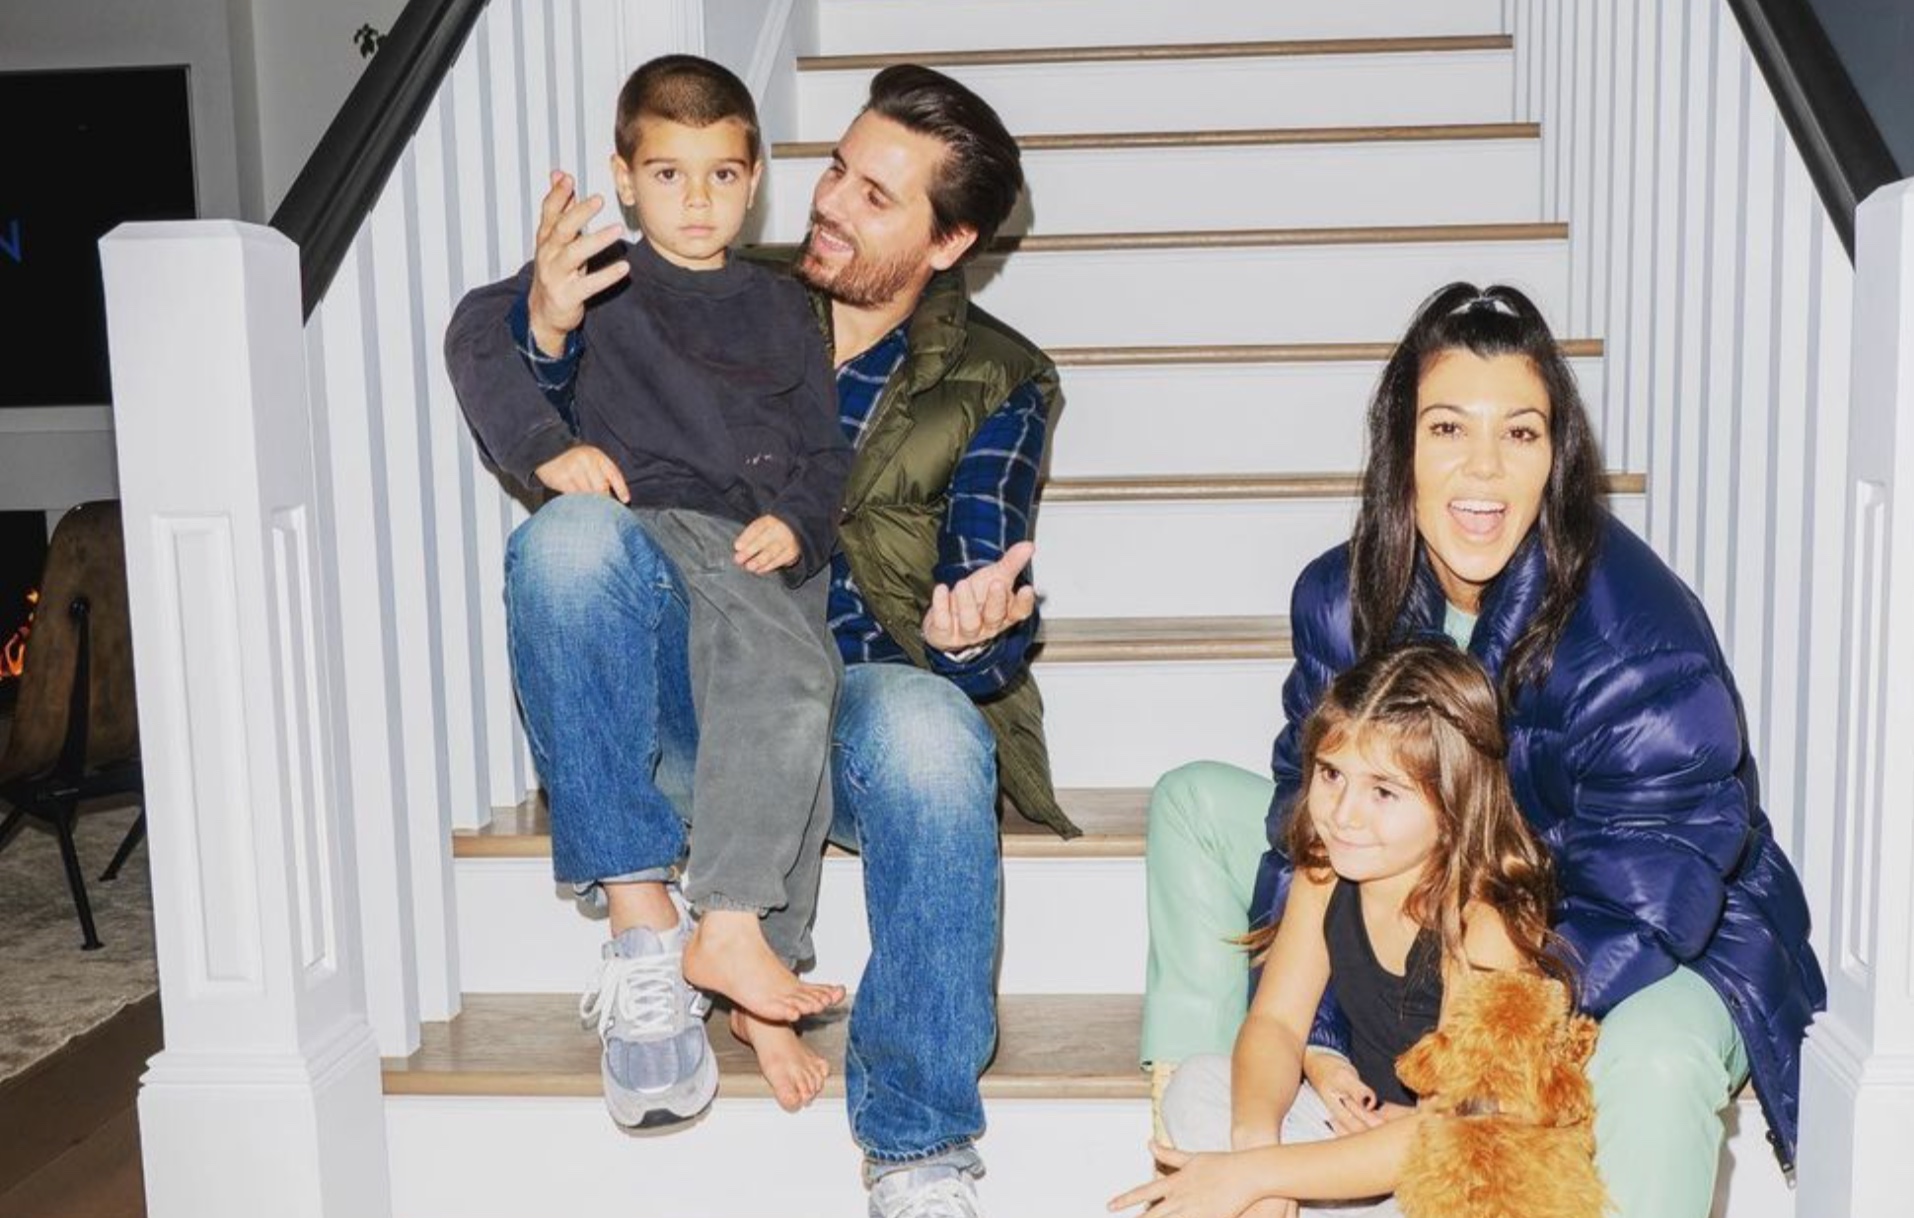 Scott Disick's Adorable Son Reign And Daughter Are His "MiniMes"